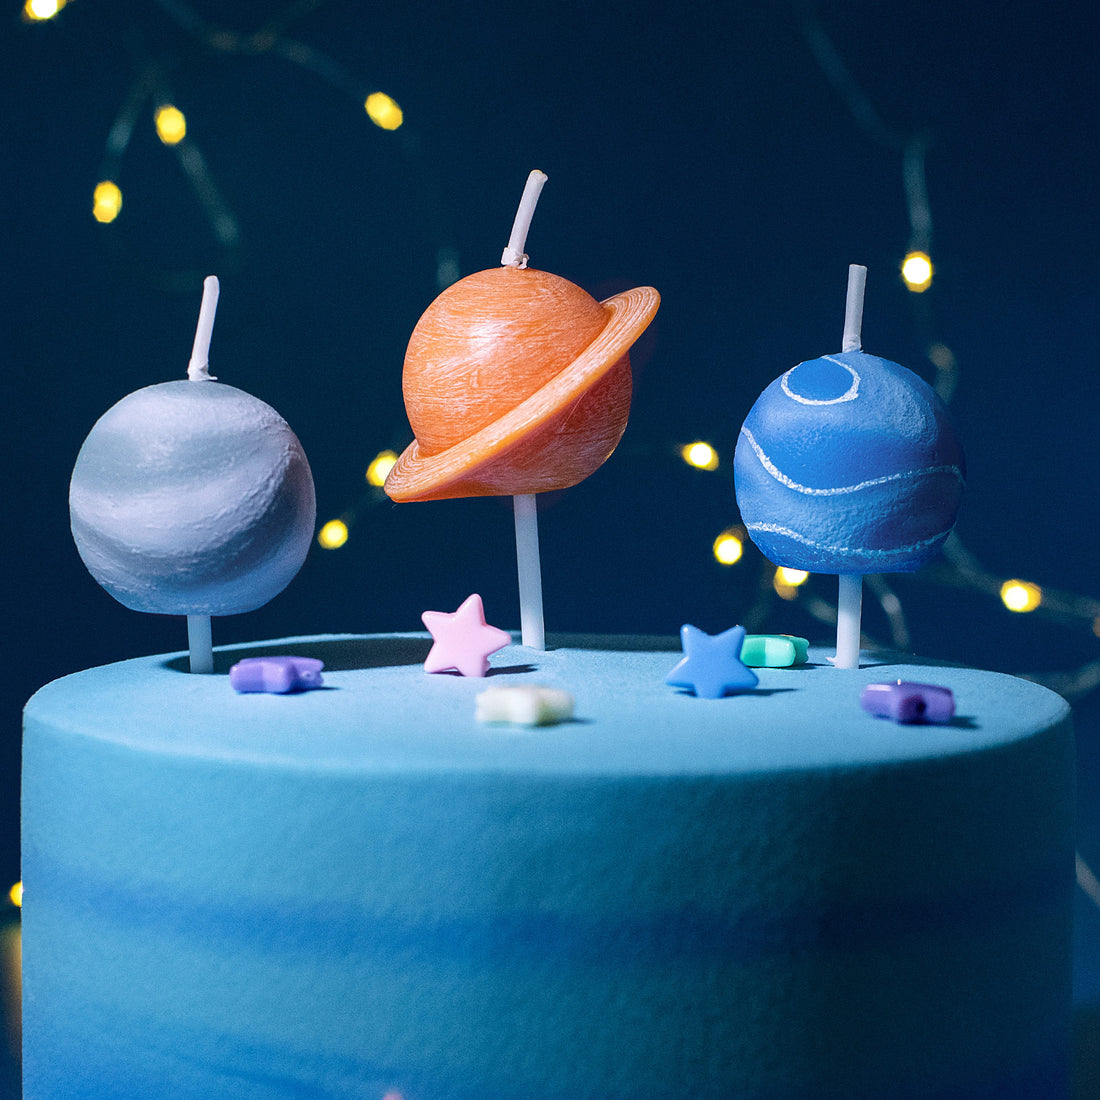 Beautiful cake toppers featuring planets and stars from Southlake Gifts.